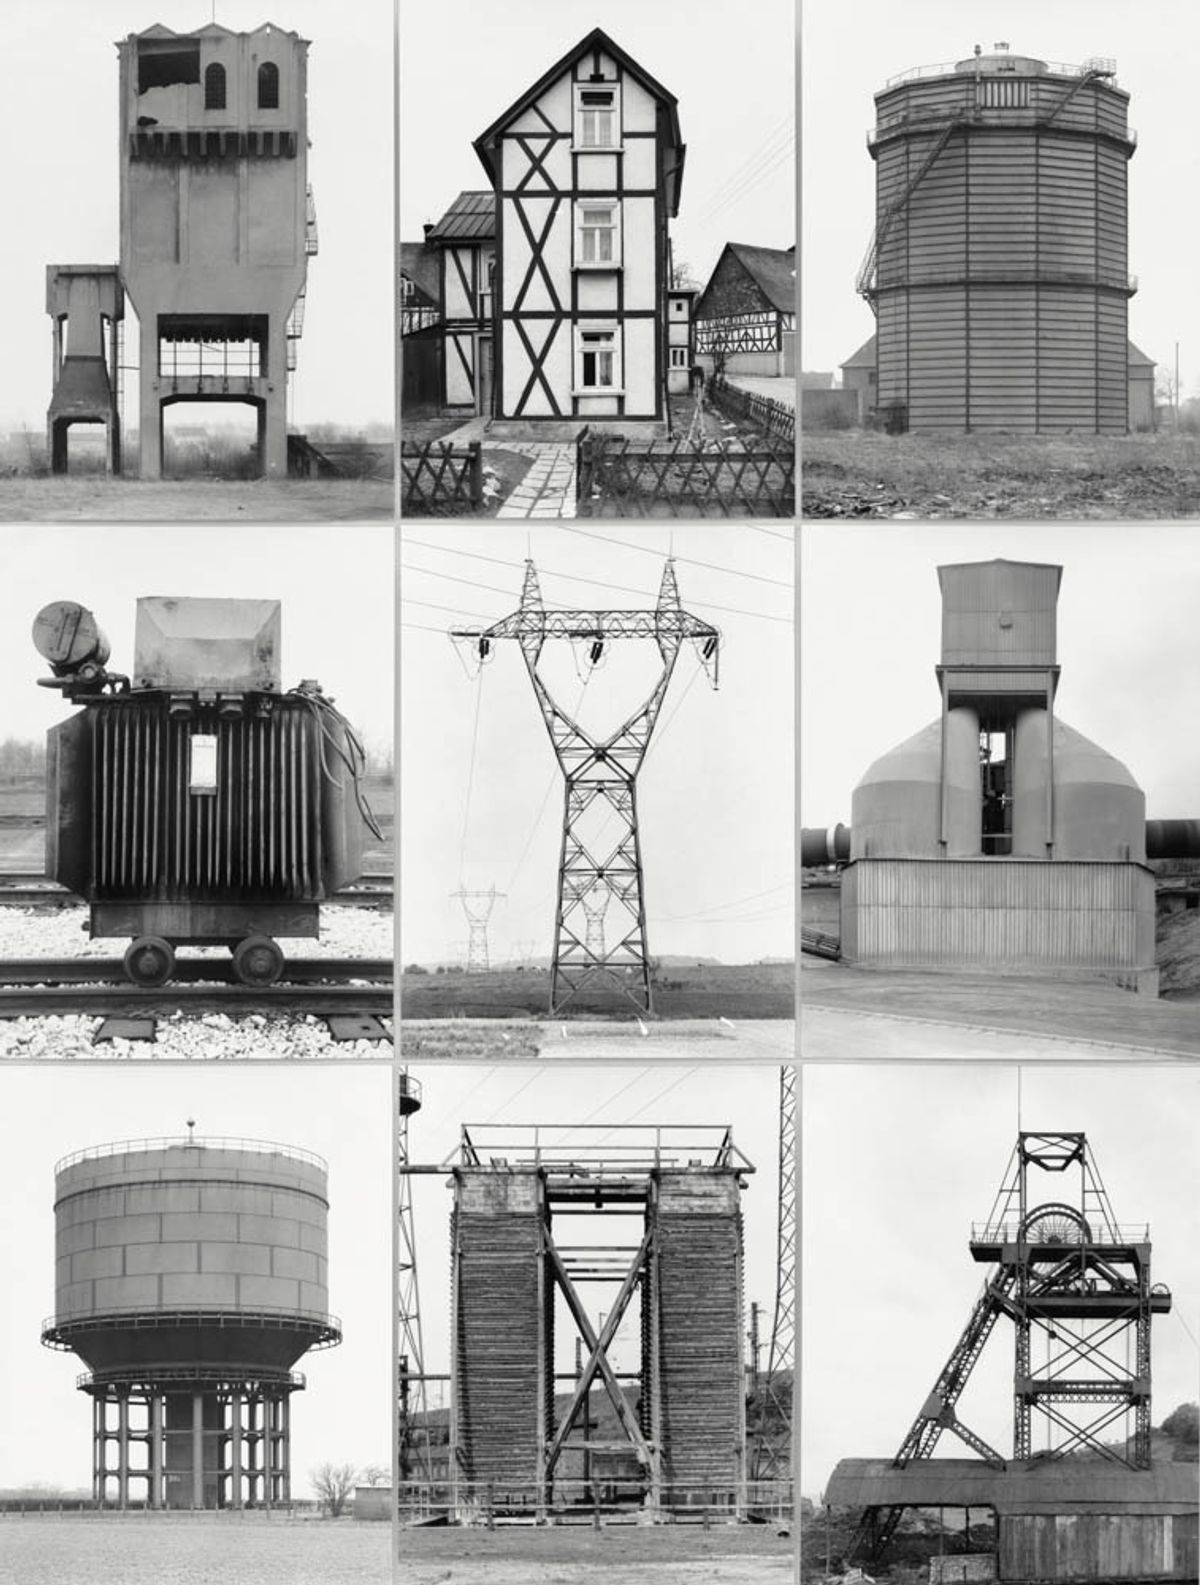 Bernd and Hilla Becher’s Comparative Juxtaposition, Nine Objects, Each with a Different Function (1961-72) © Bernd and Hilla Becher



